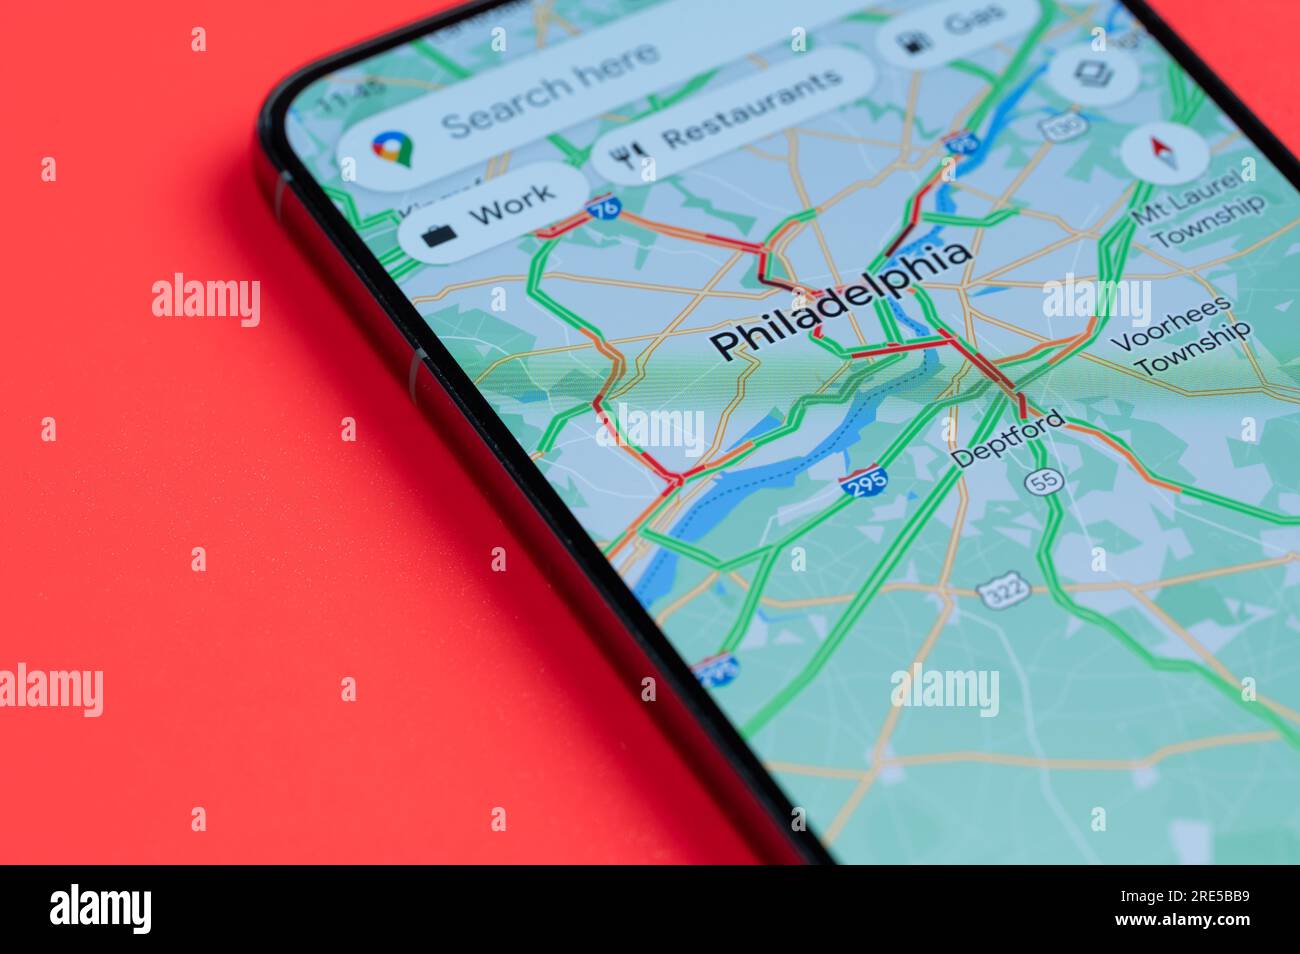 New York, USA - July 21, 2023: Car traffic on Philadelphia google maps on smartphone screen close up view with red background Stock Photo